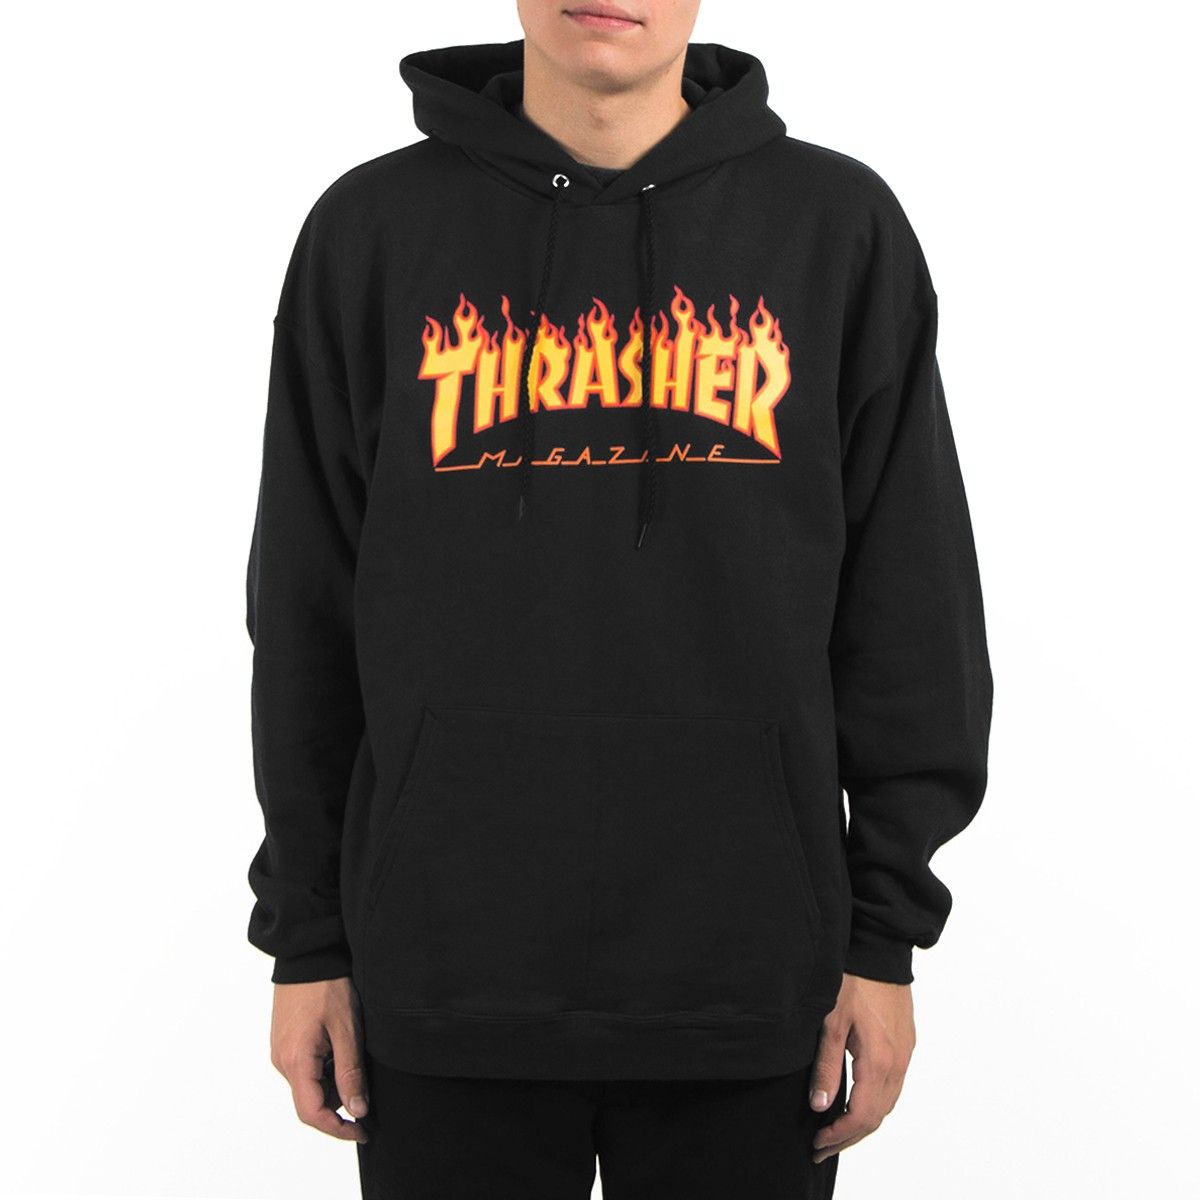 Pull Thrasher Vert Clearance, 60% OFF | a4accounting.com.au